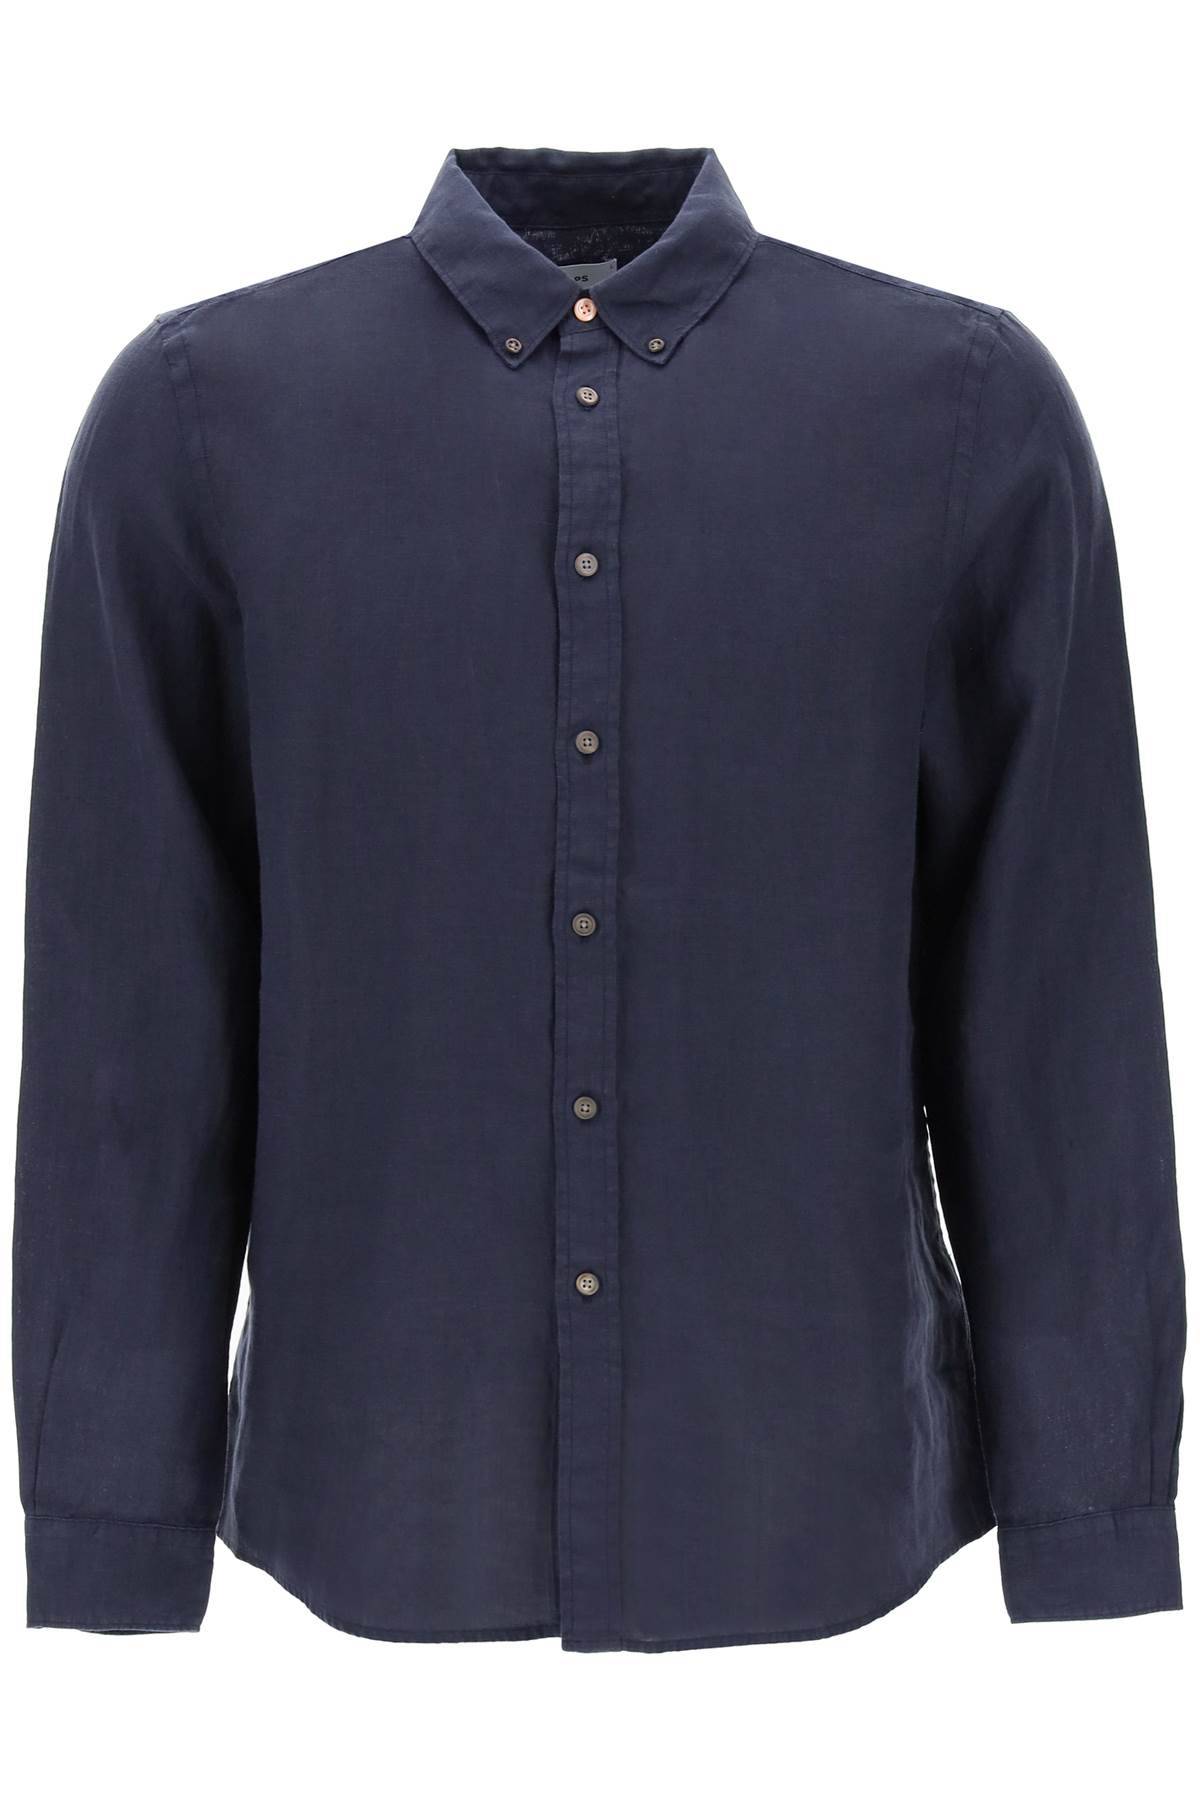 Ps Paul Smith PS PAUL SMITH linen button-down shirt for